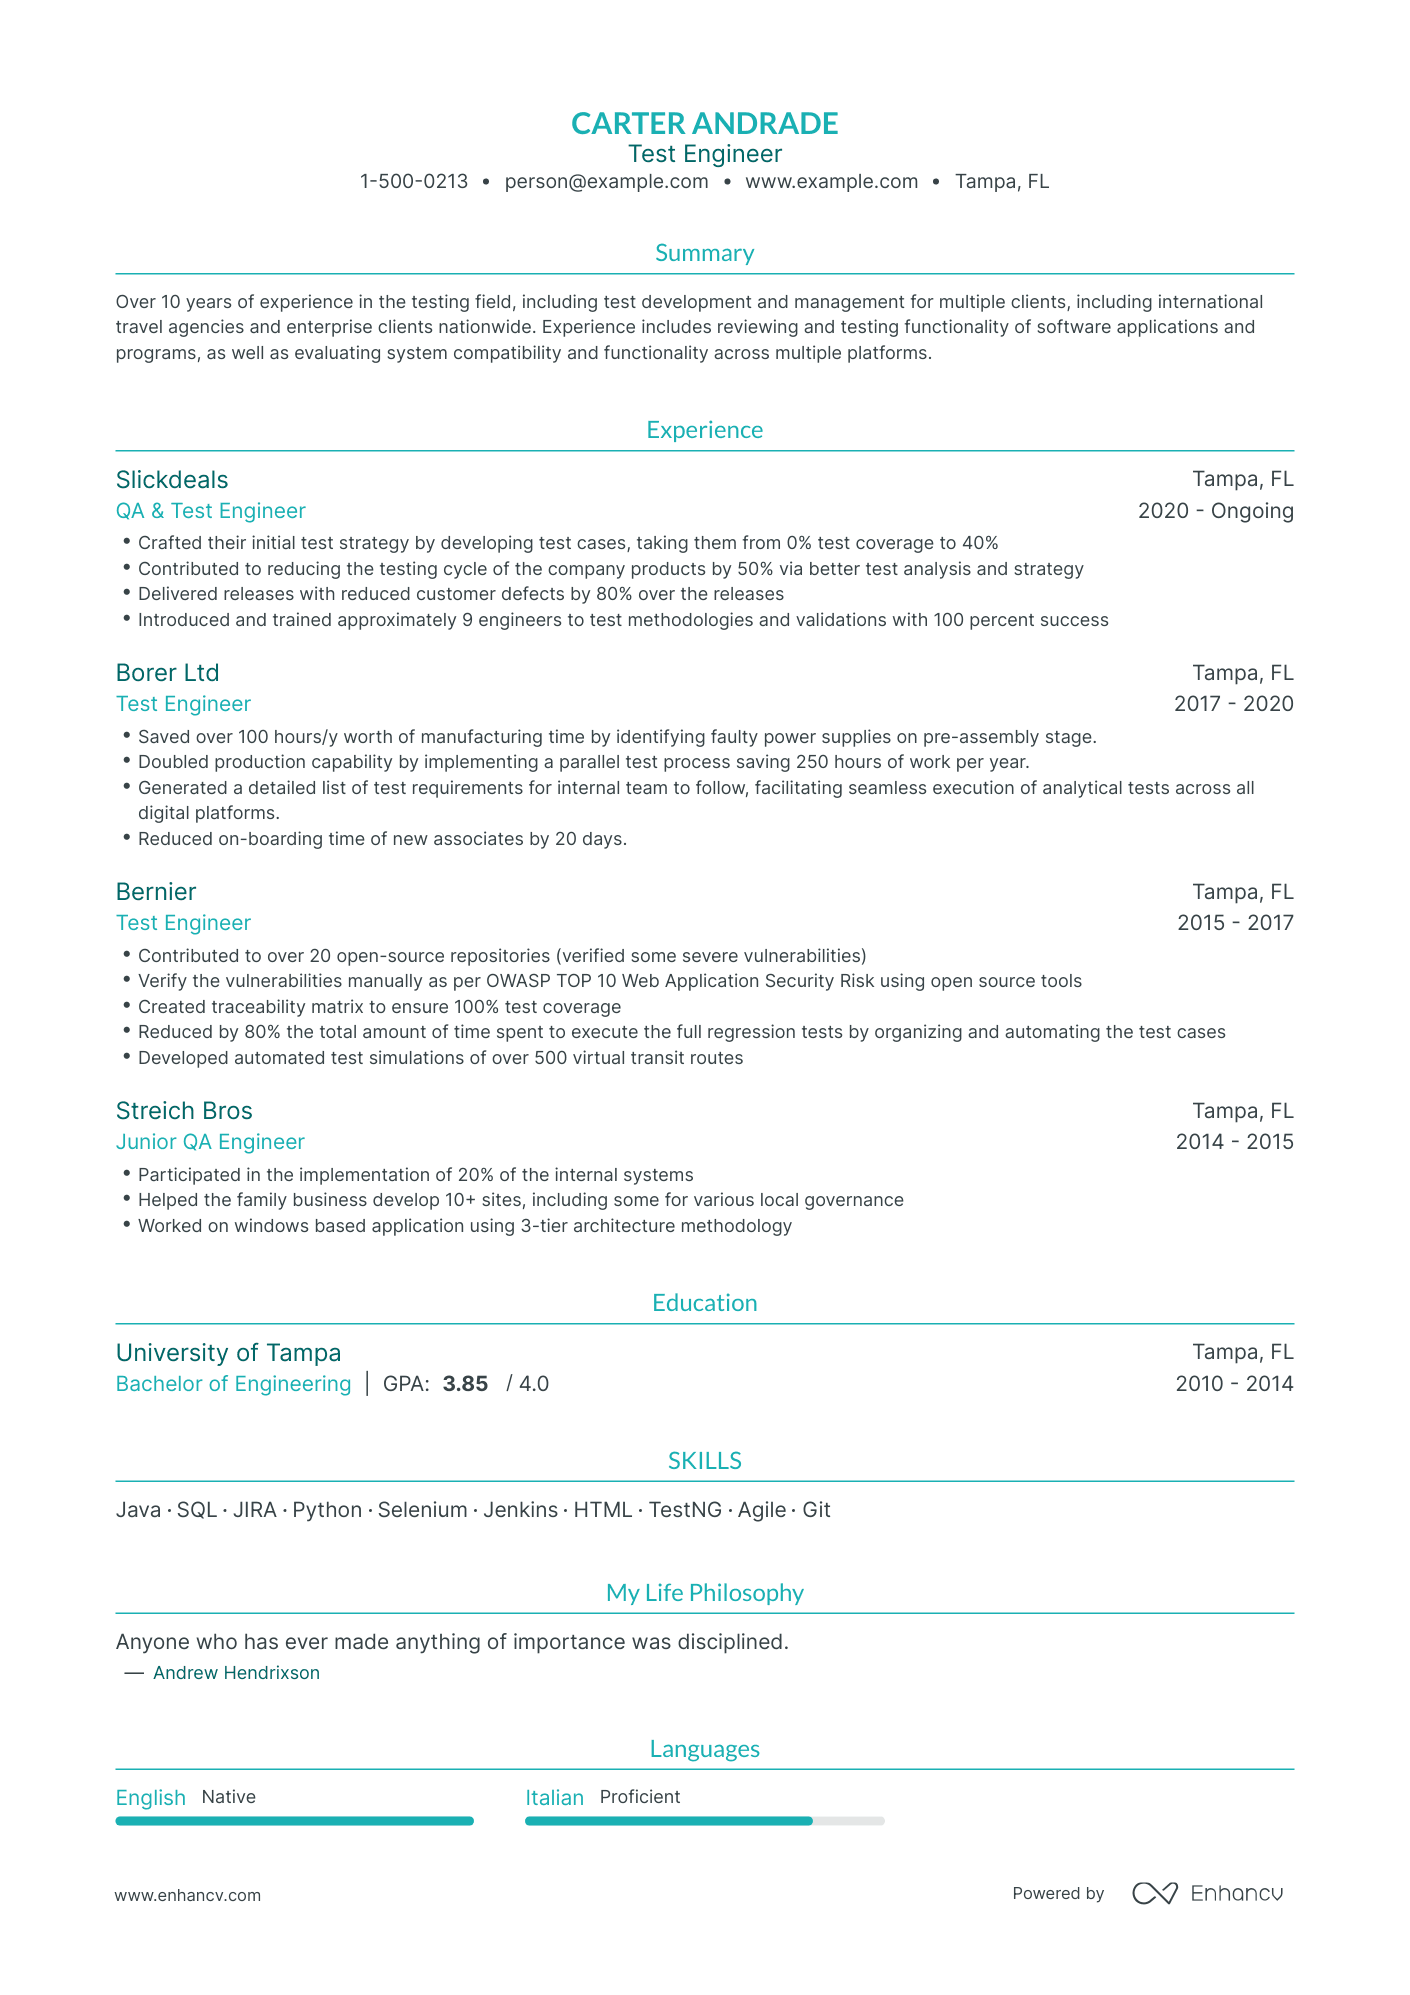 Traditional Test Engineer Resume Template